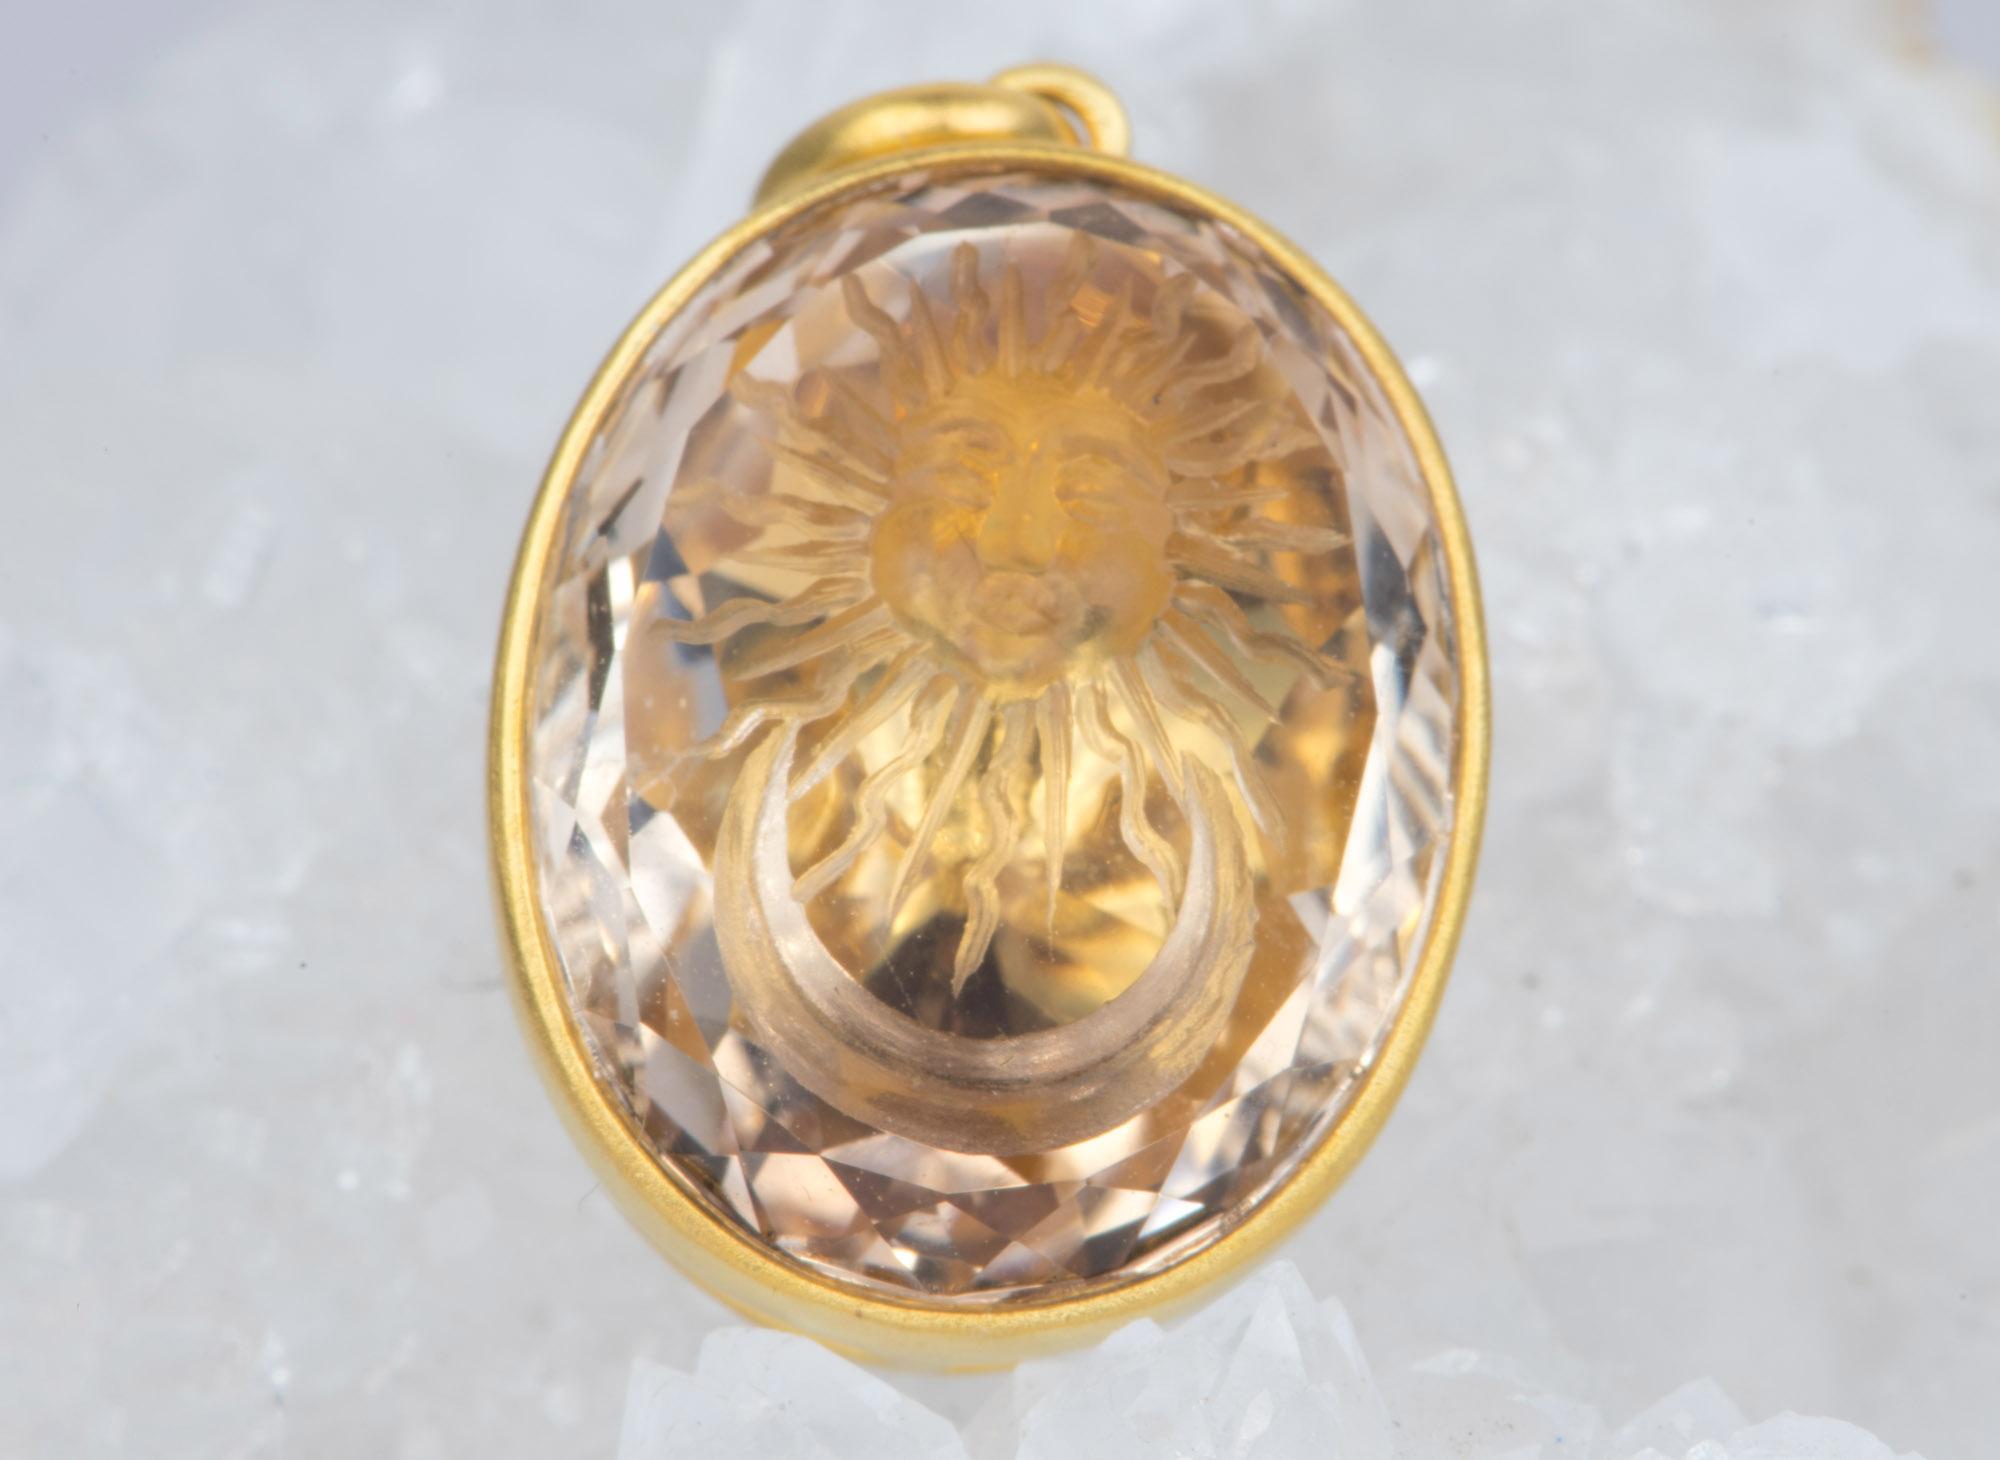 ♥  This is a pendant featuring a stunning hand-carved sun and moon intaglio topaz, bezel set in luxurious 14K yellow gold in a matte finish
♥  This listing is for the pendant ONLY. The chain shown in the photos do not come with the pendant.

♥ 